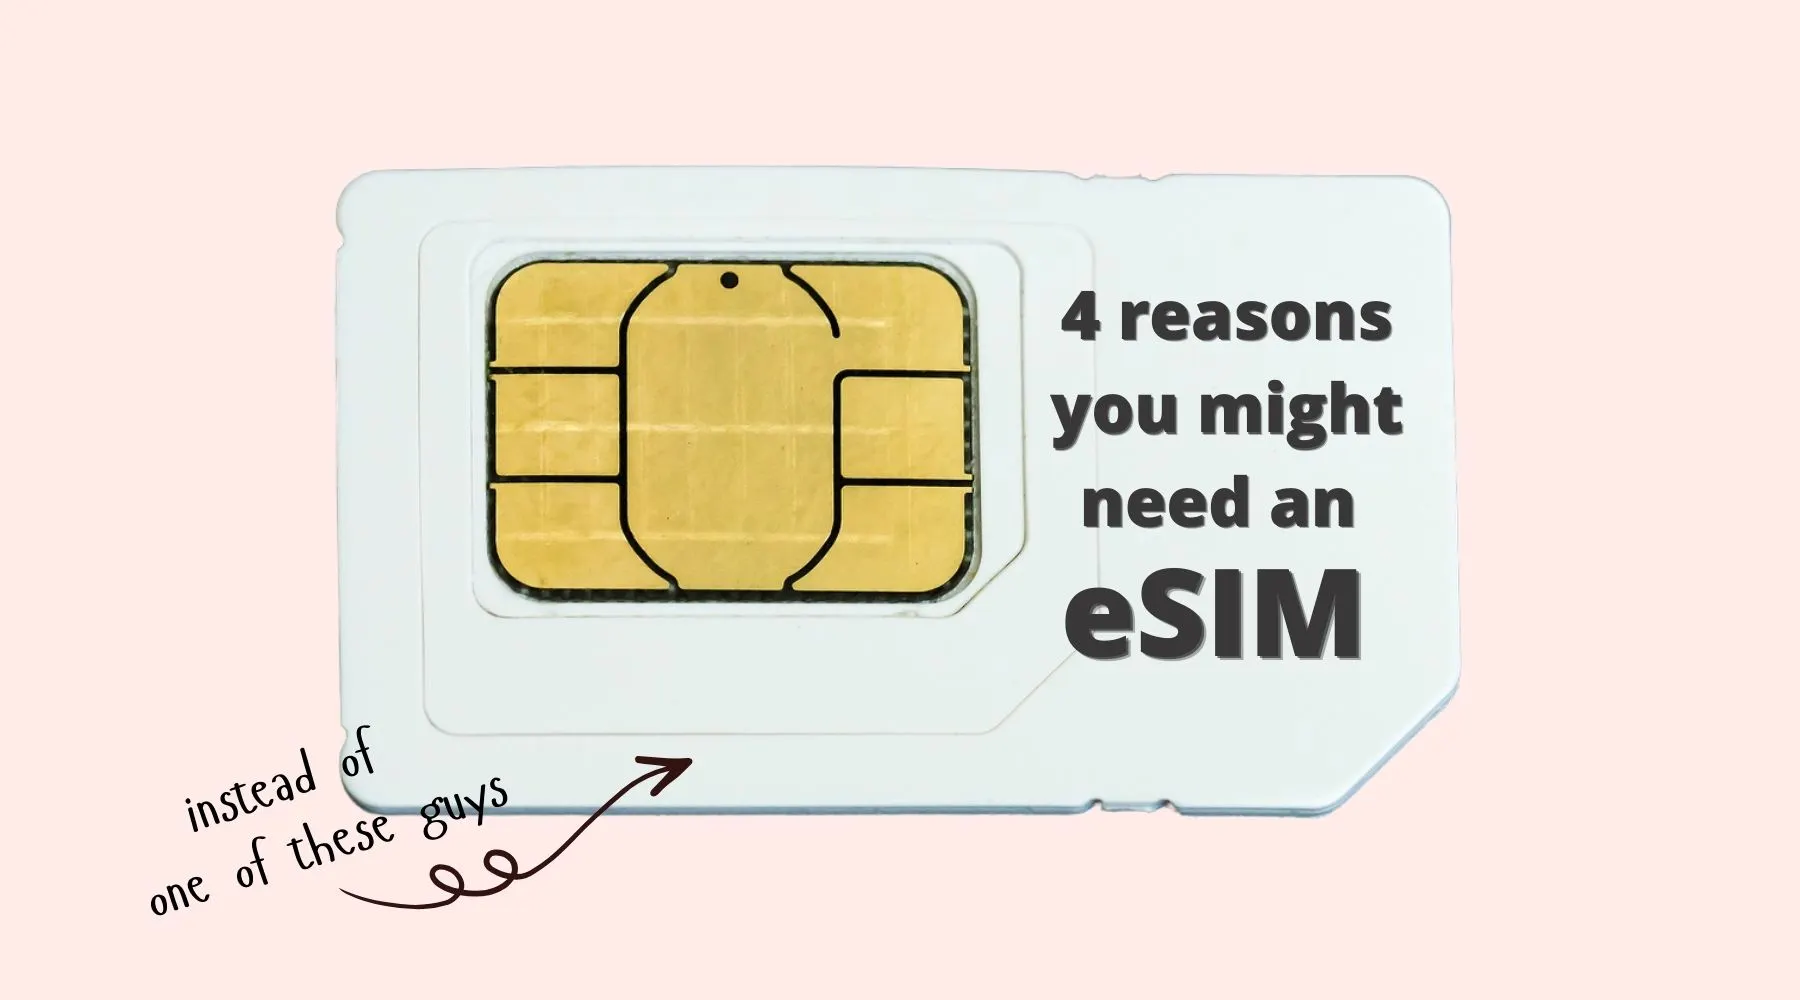 4 reasons you might need an eSIM in your life